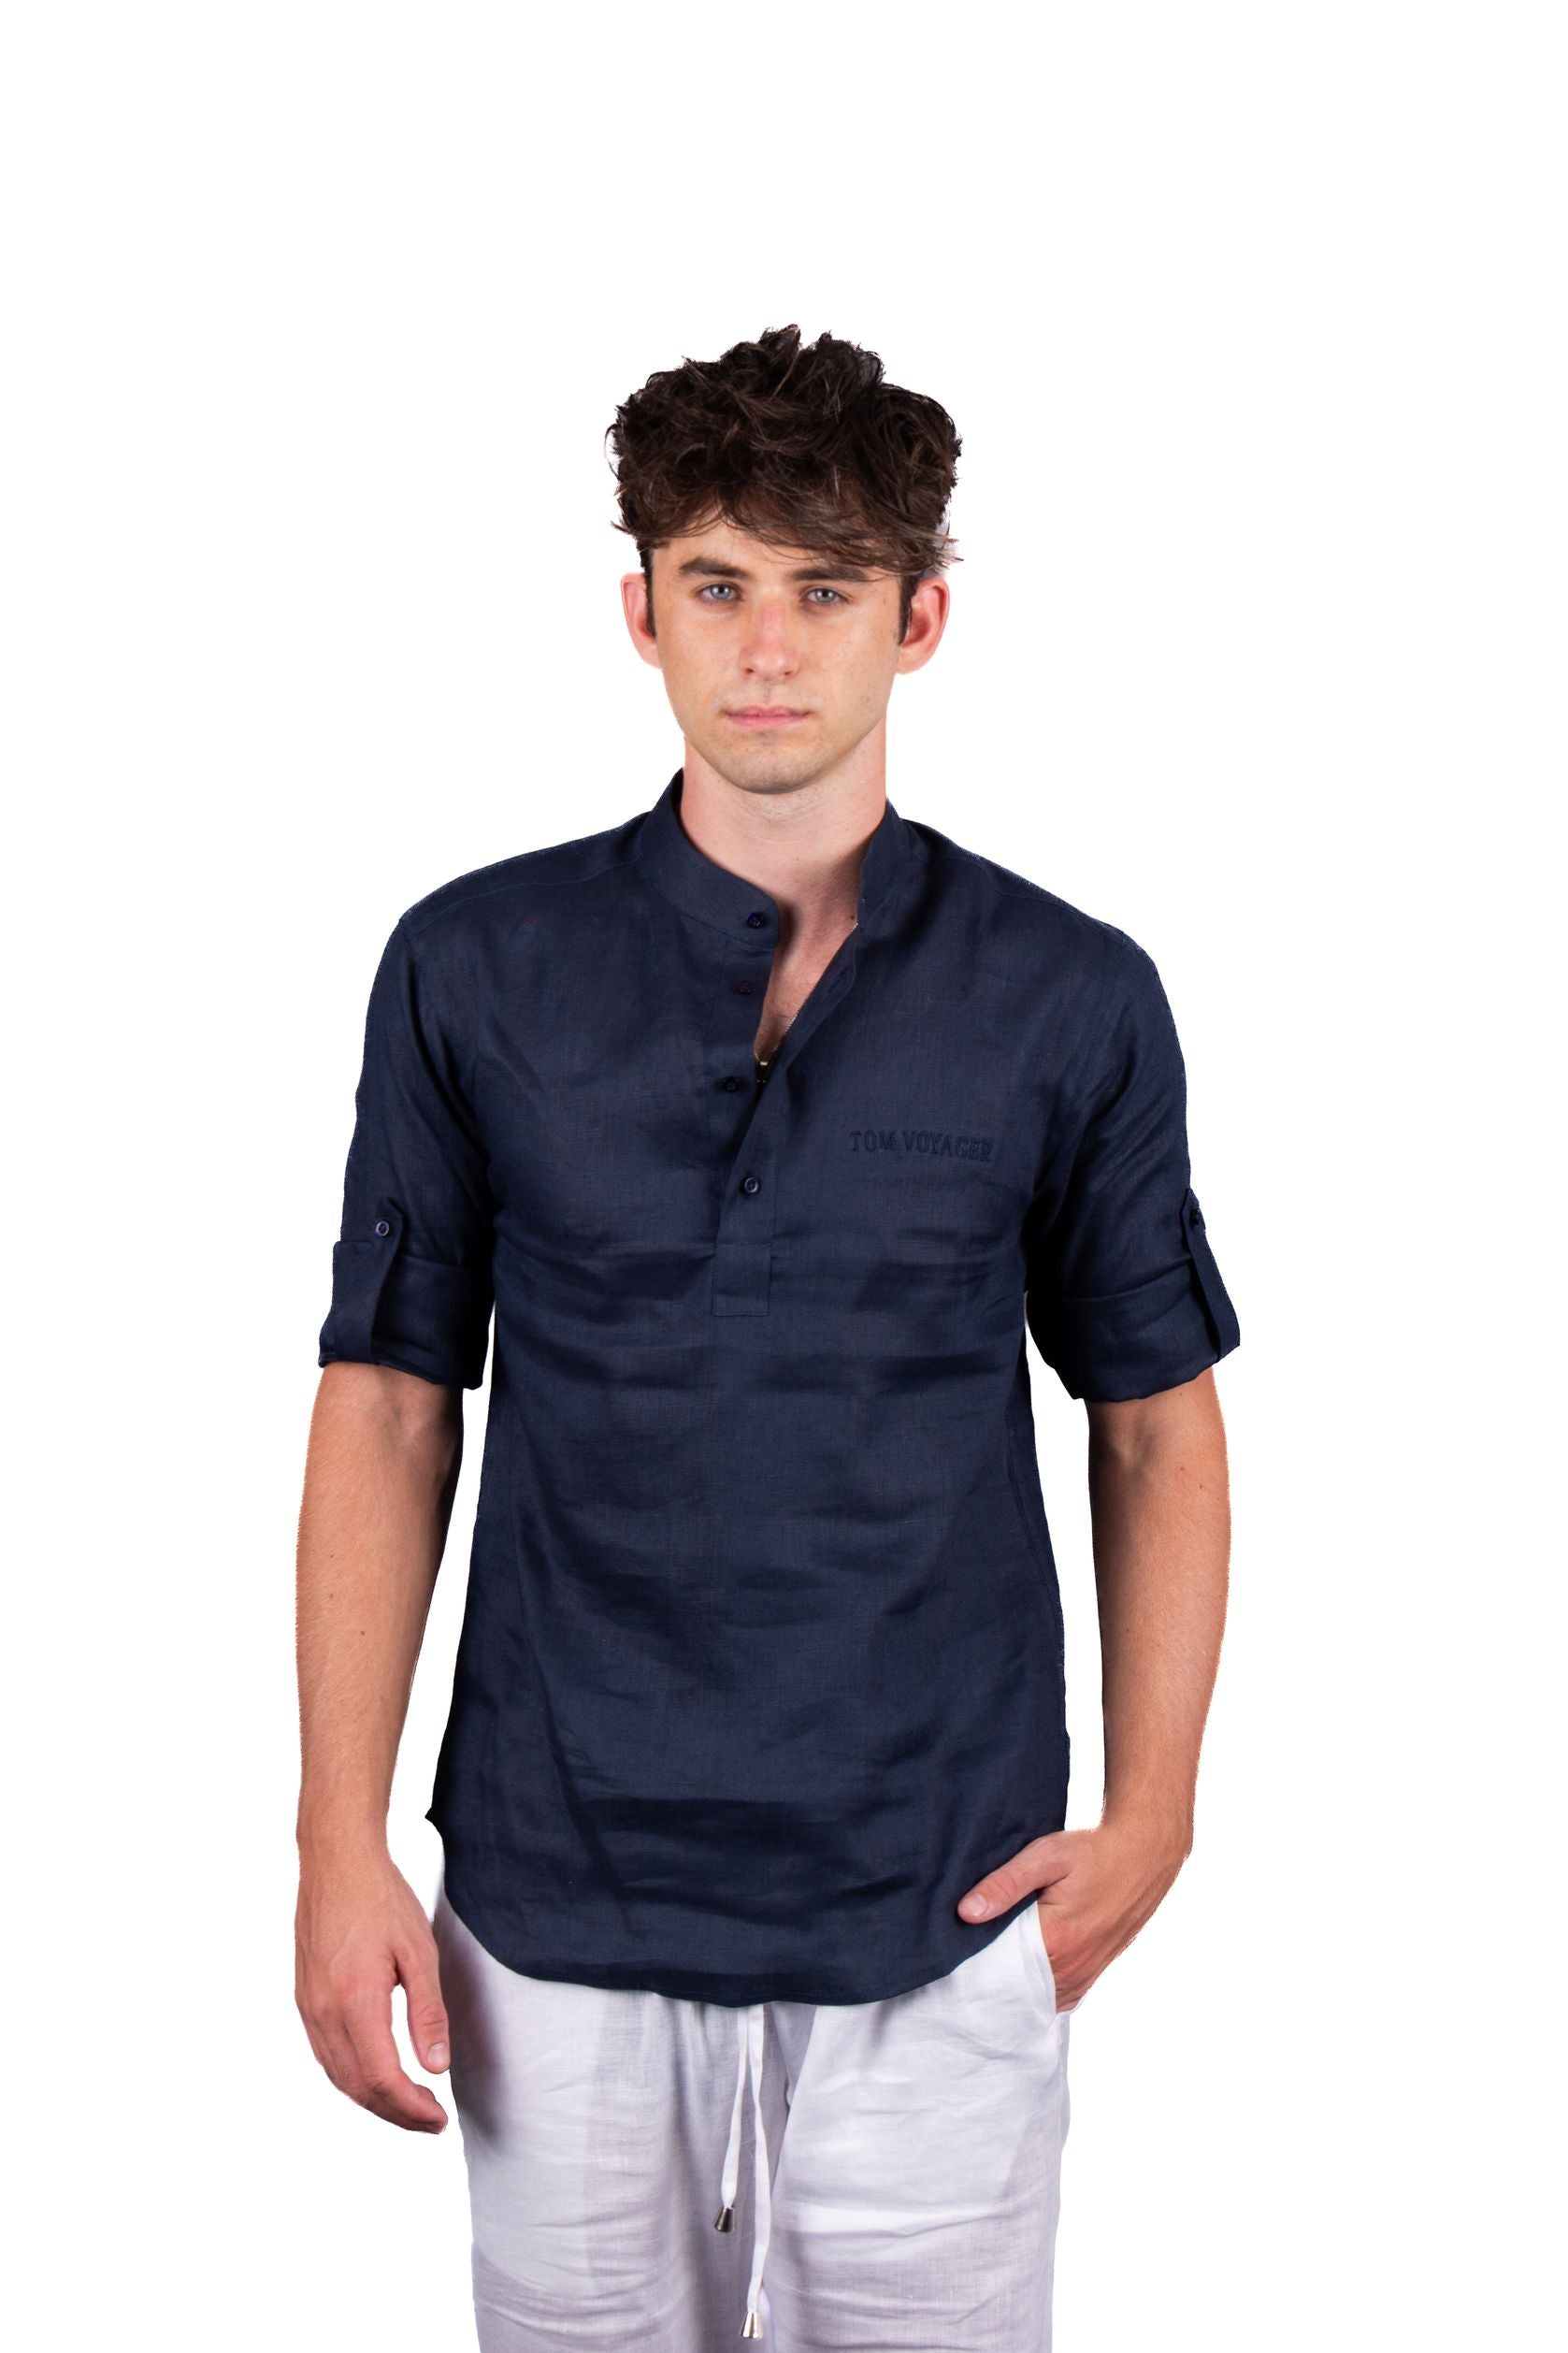 Flush mens linen shirt - linen shirt - navy blue - stylish and perfect for every occassion